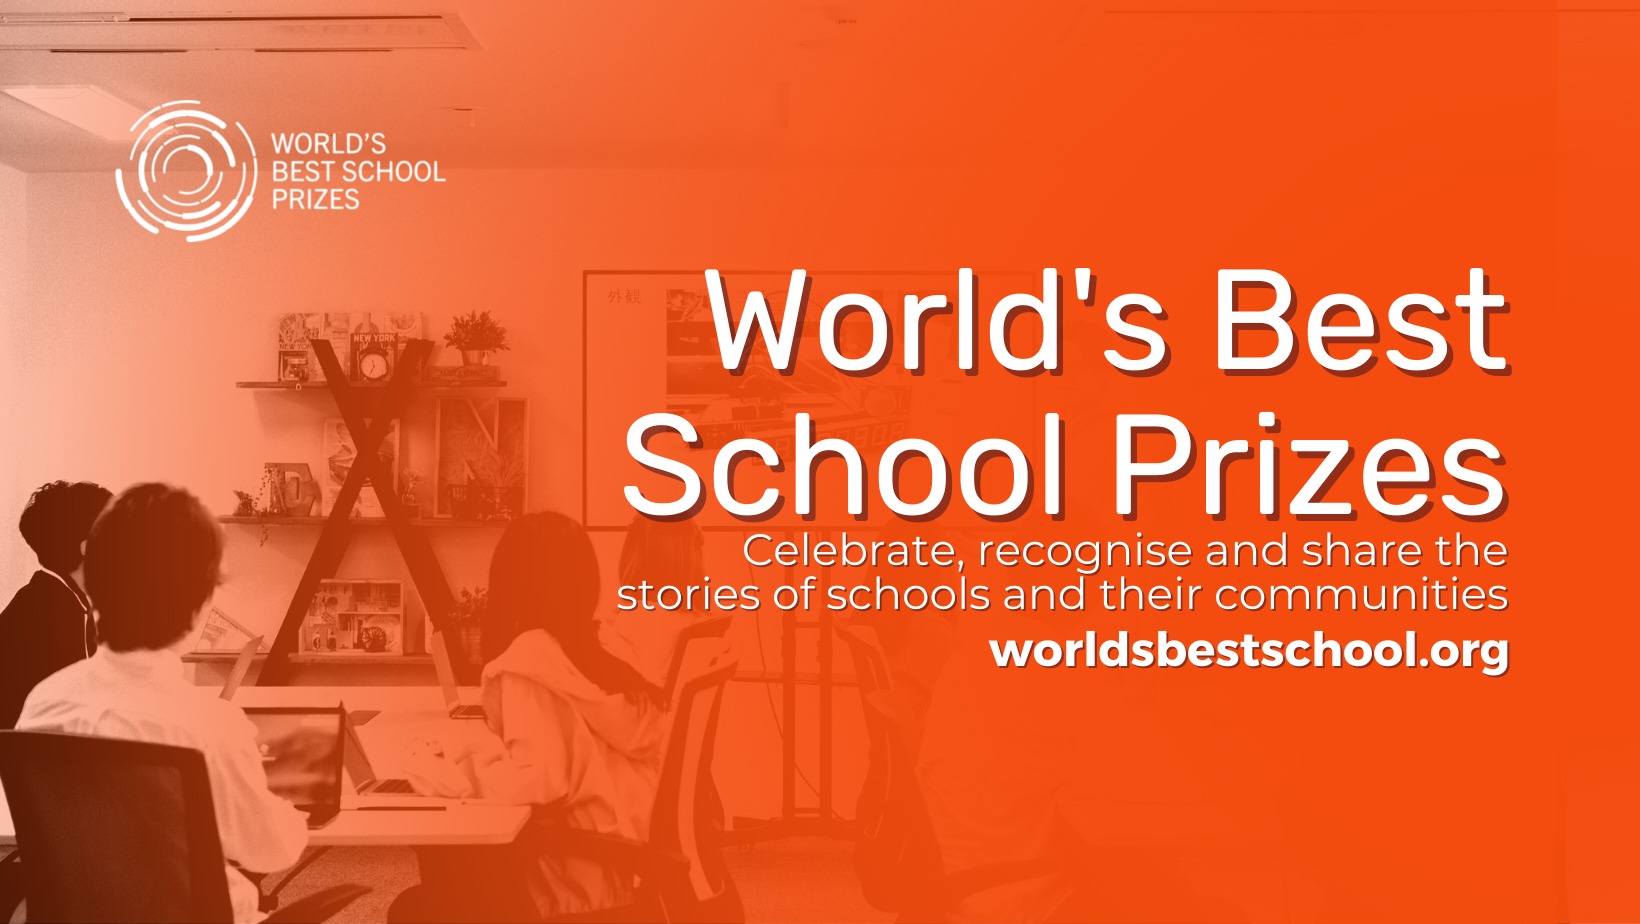 World’s Best School Prizes 2023 ($250,000 total prize)